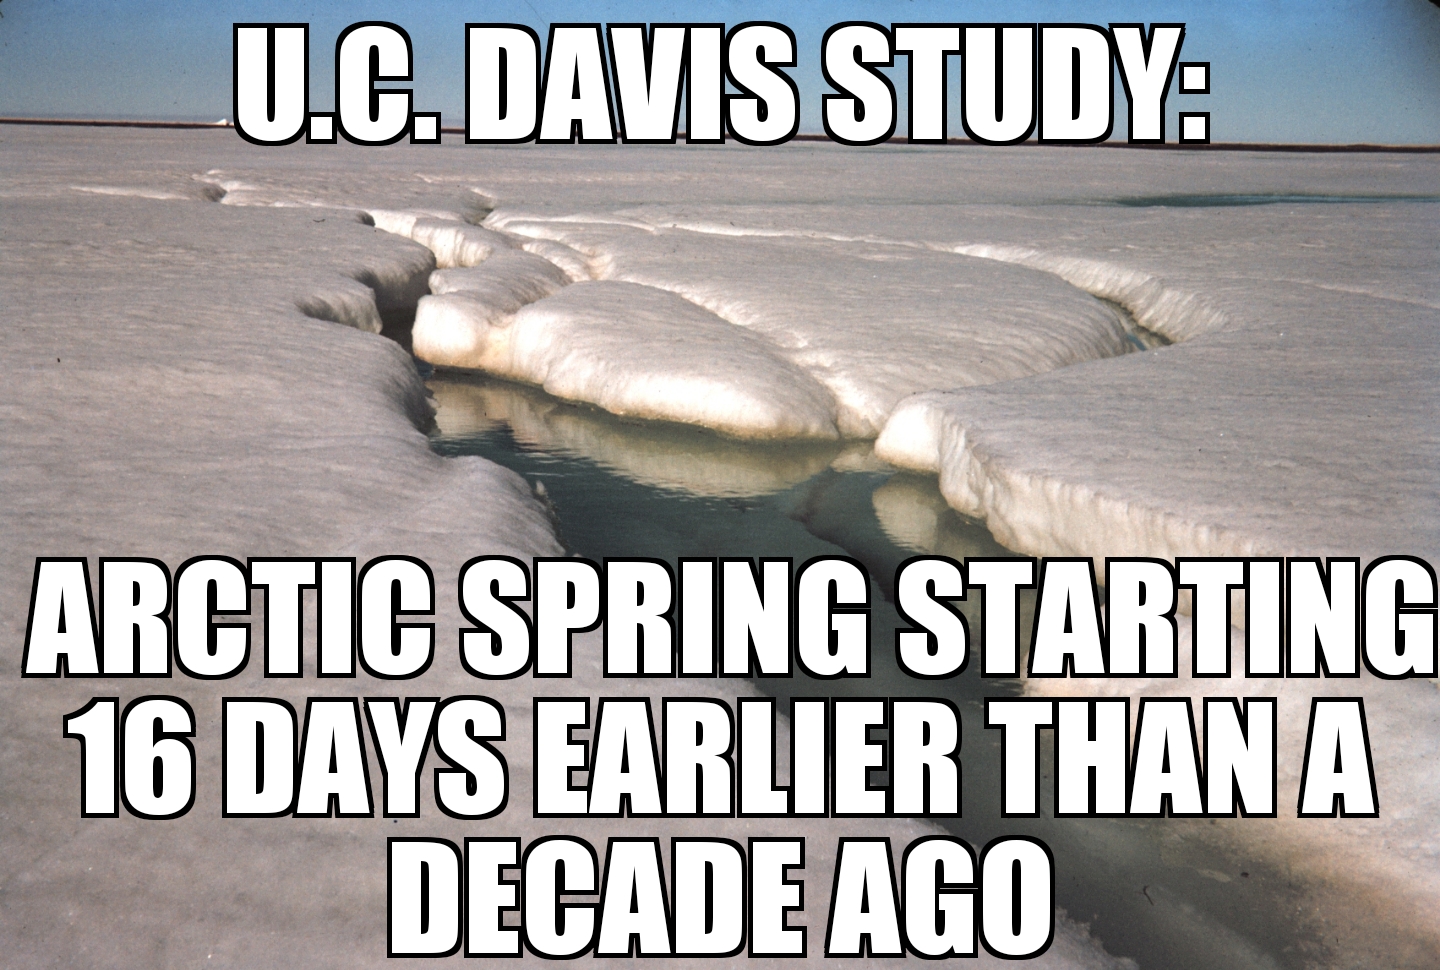 Arctic spring starting 16 days earlier